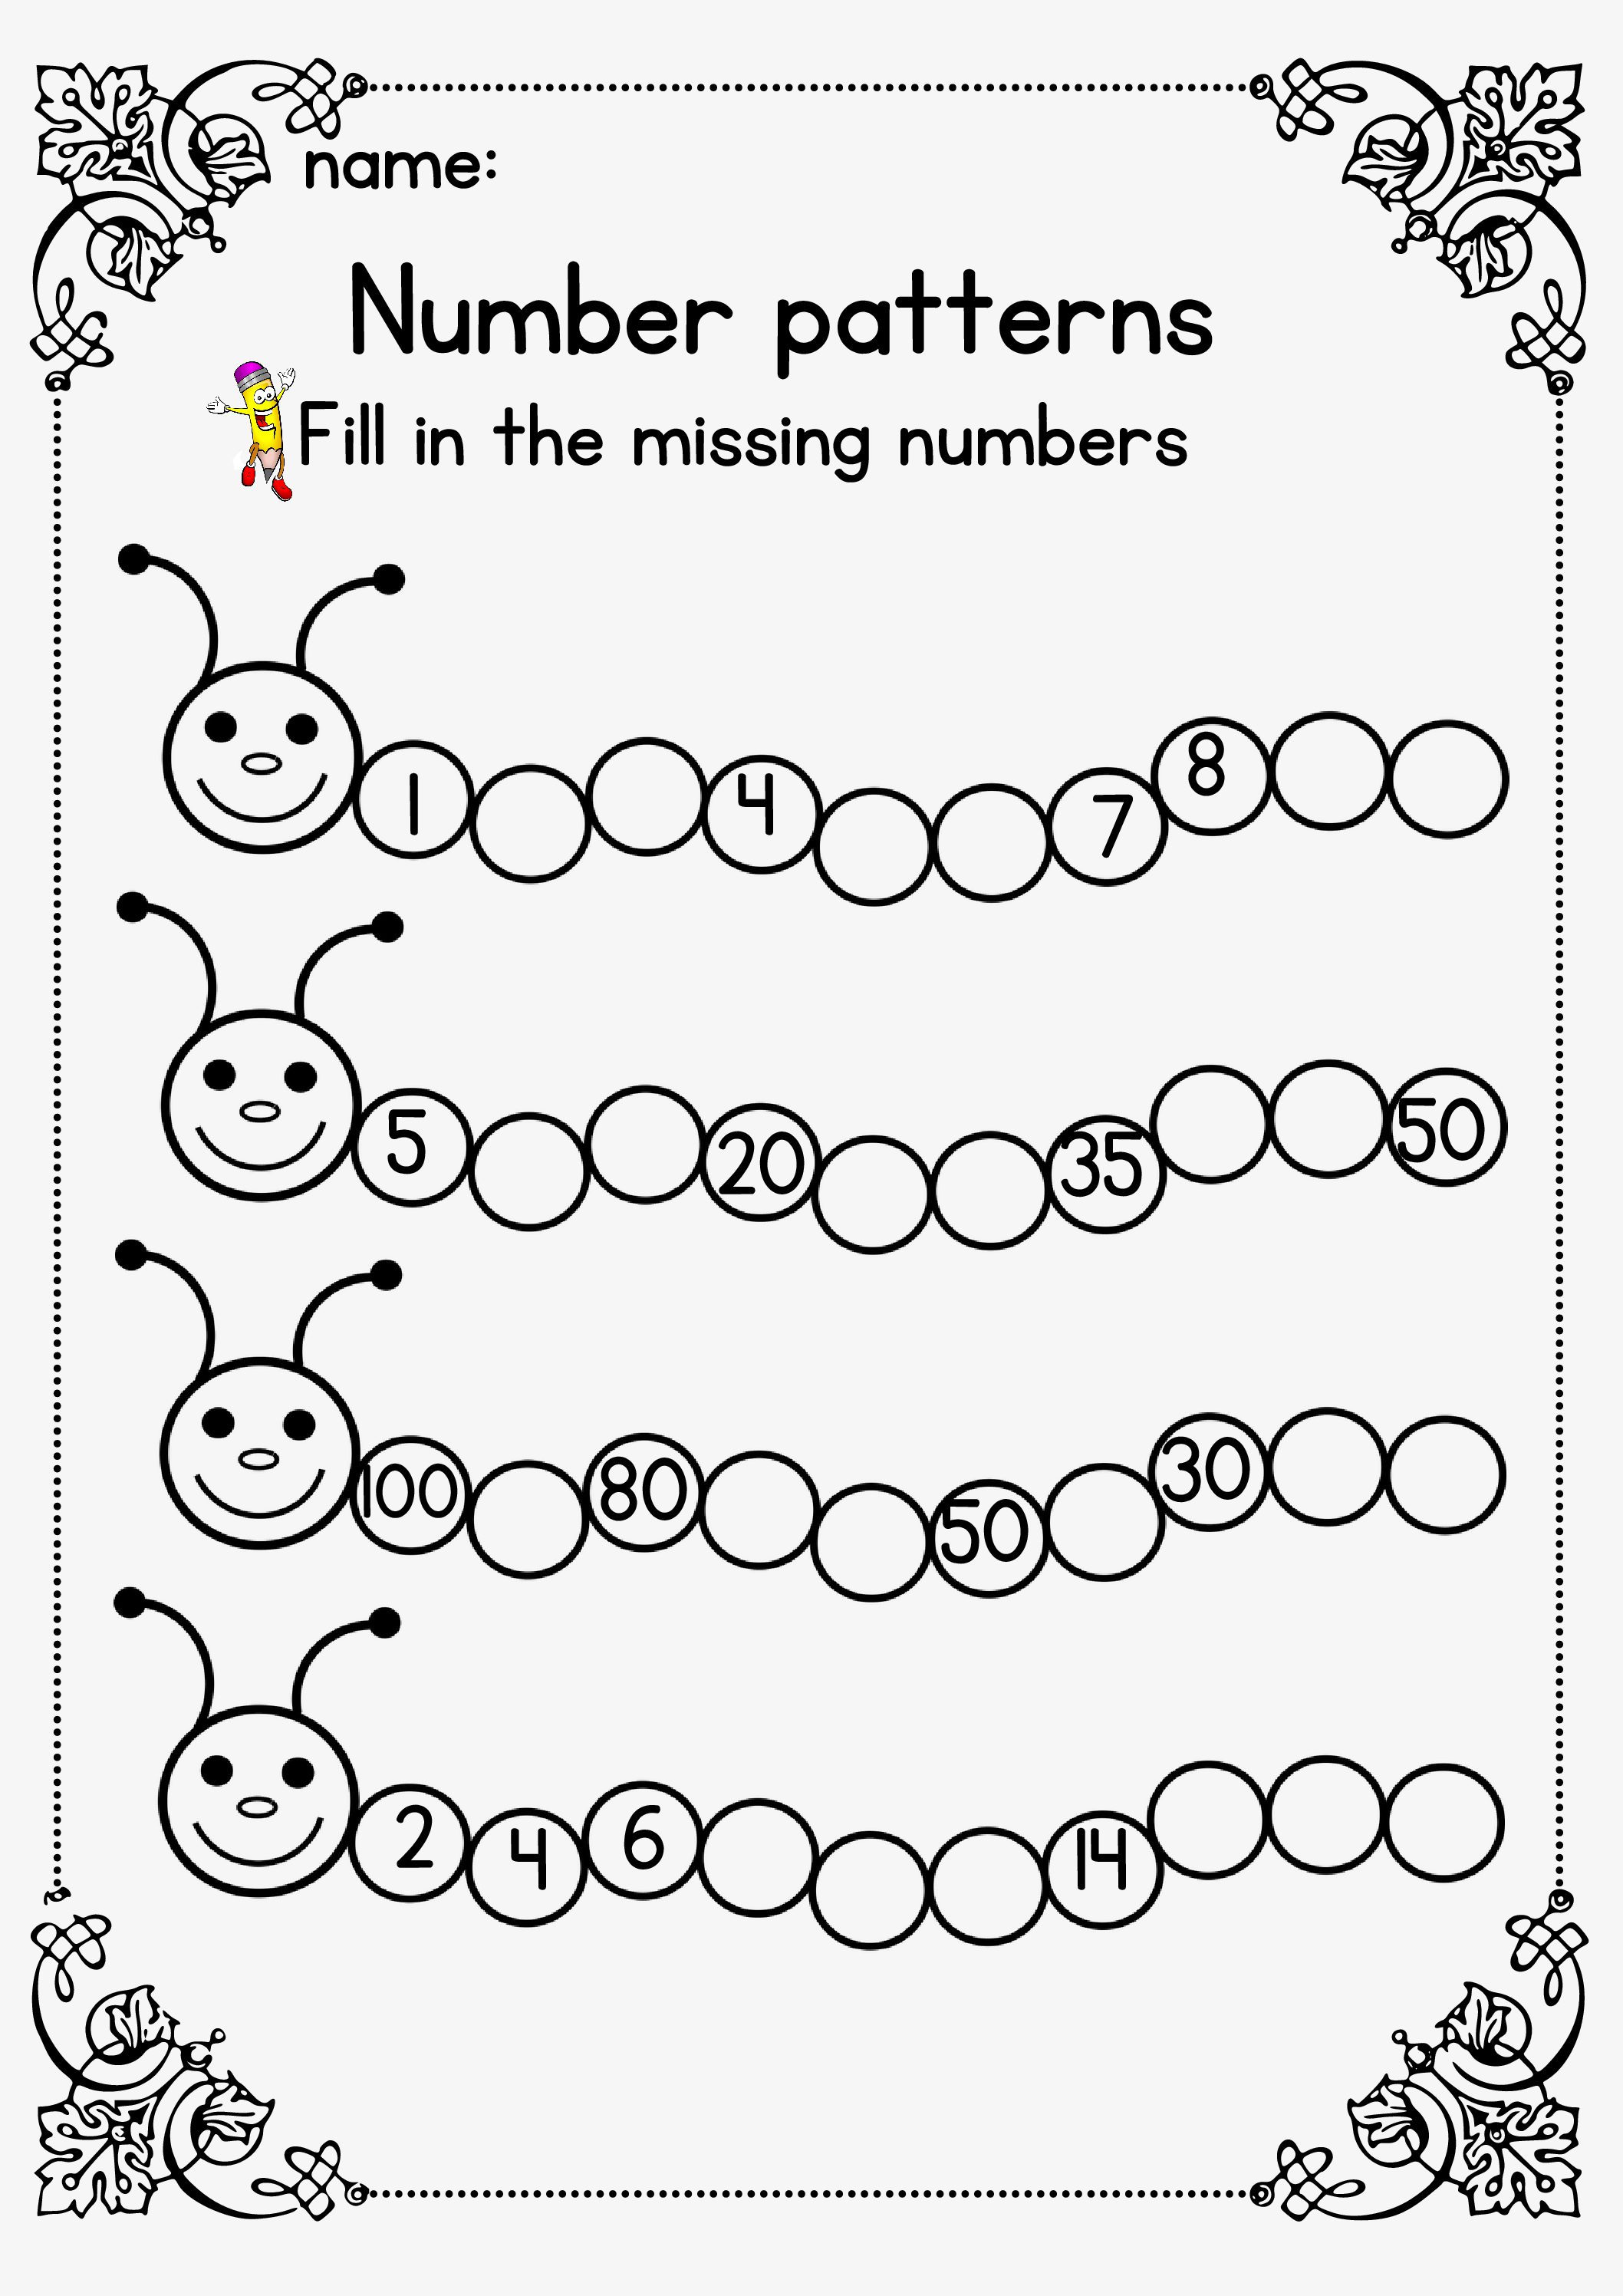 Number Patterns Worksheet Number Patterns Worksheets Pattern Images